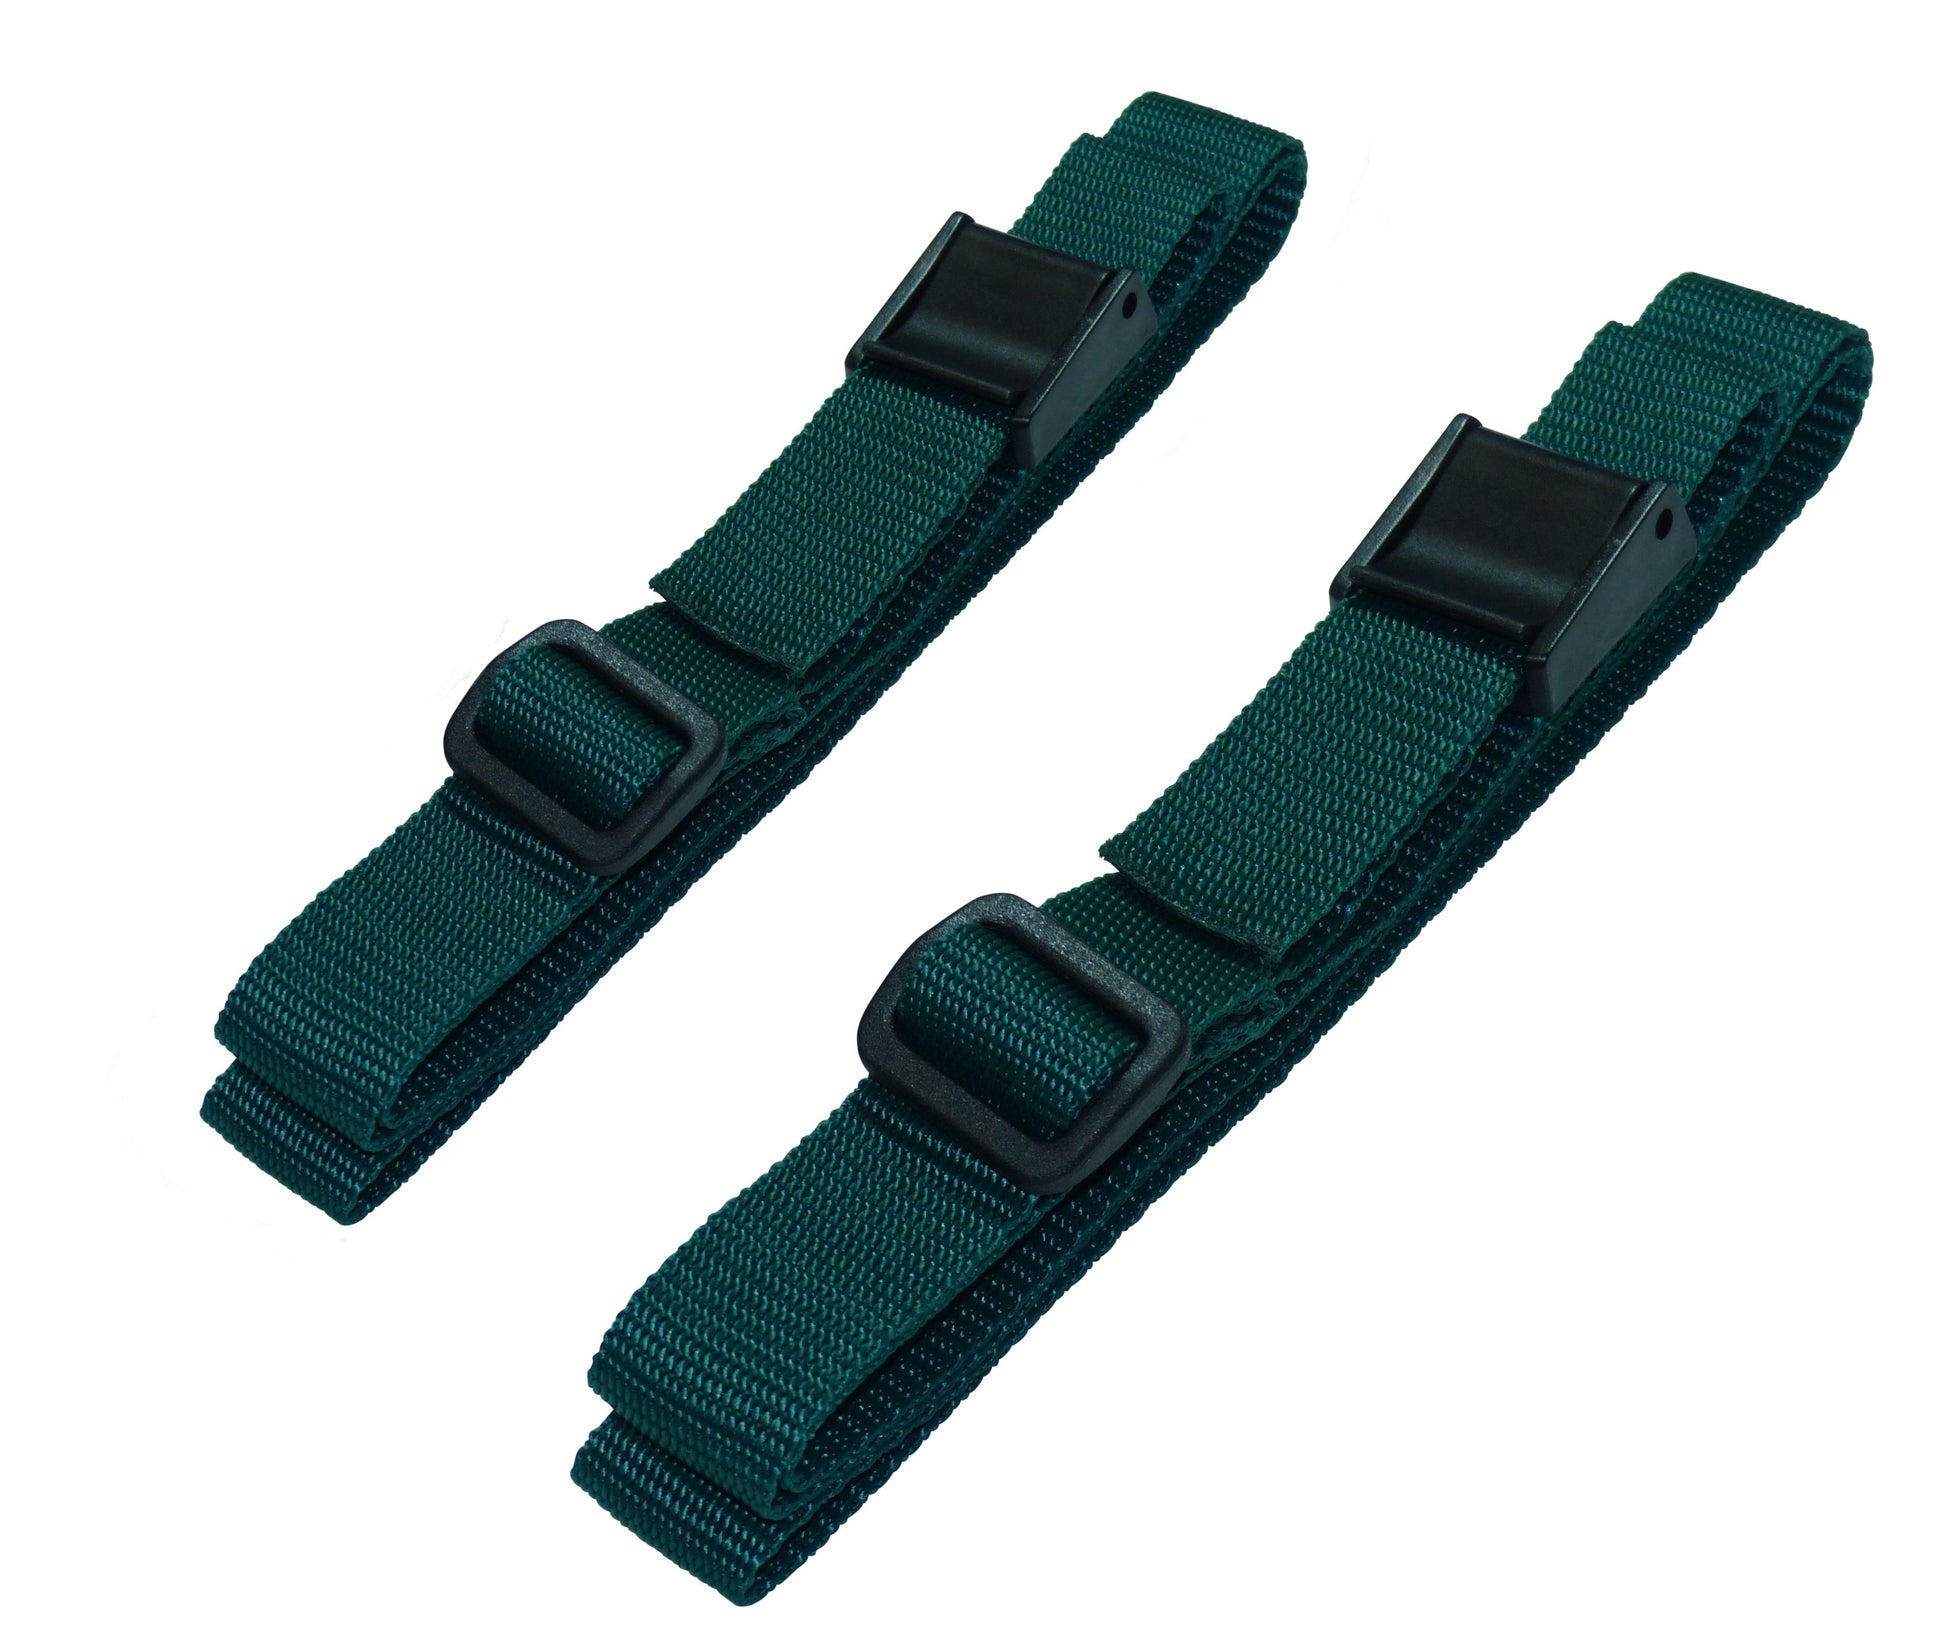 25mm Rivetted Strap with Plastic Cam Buckle & Triglide Buckles (Pair) in forest